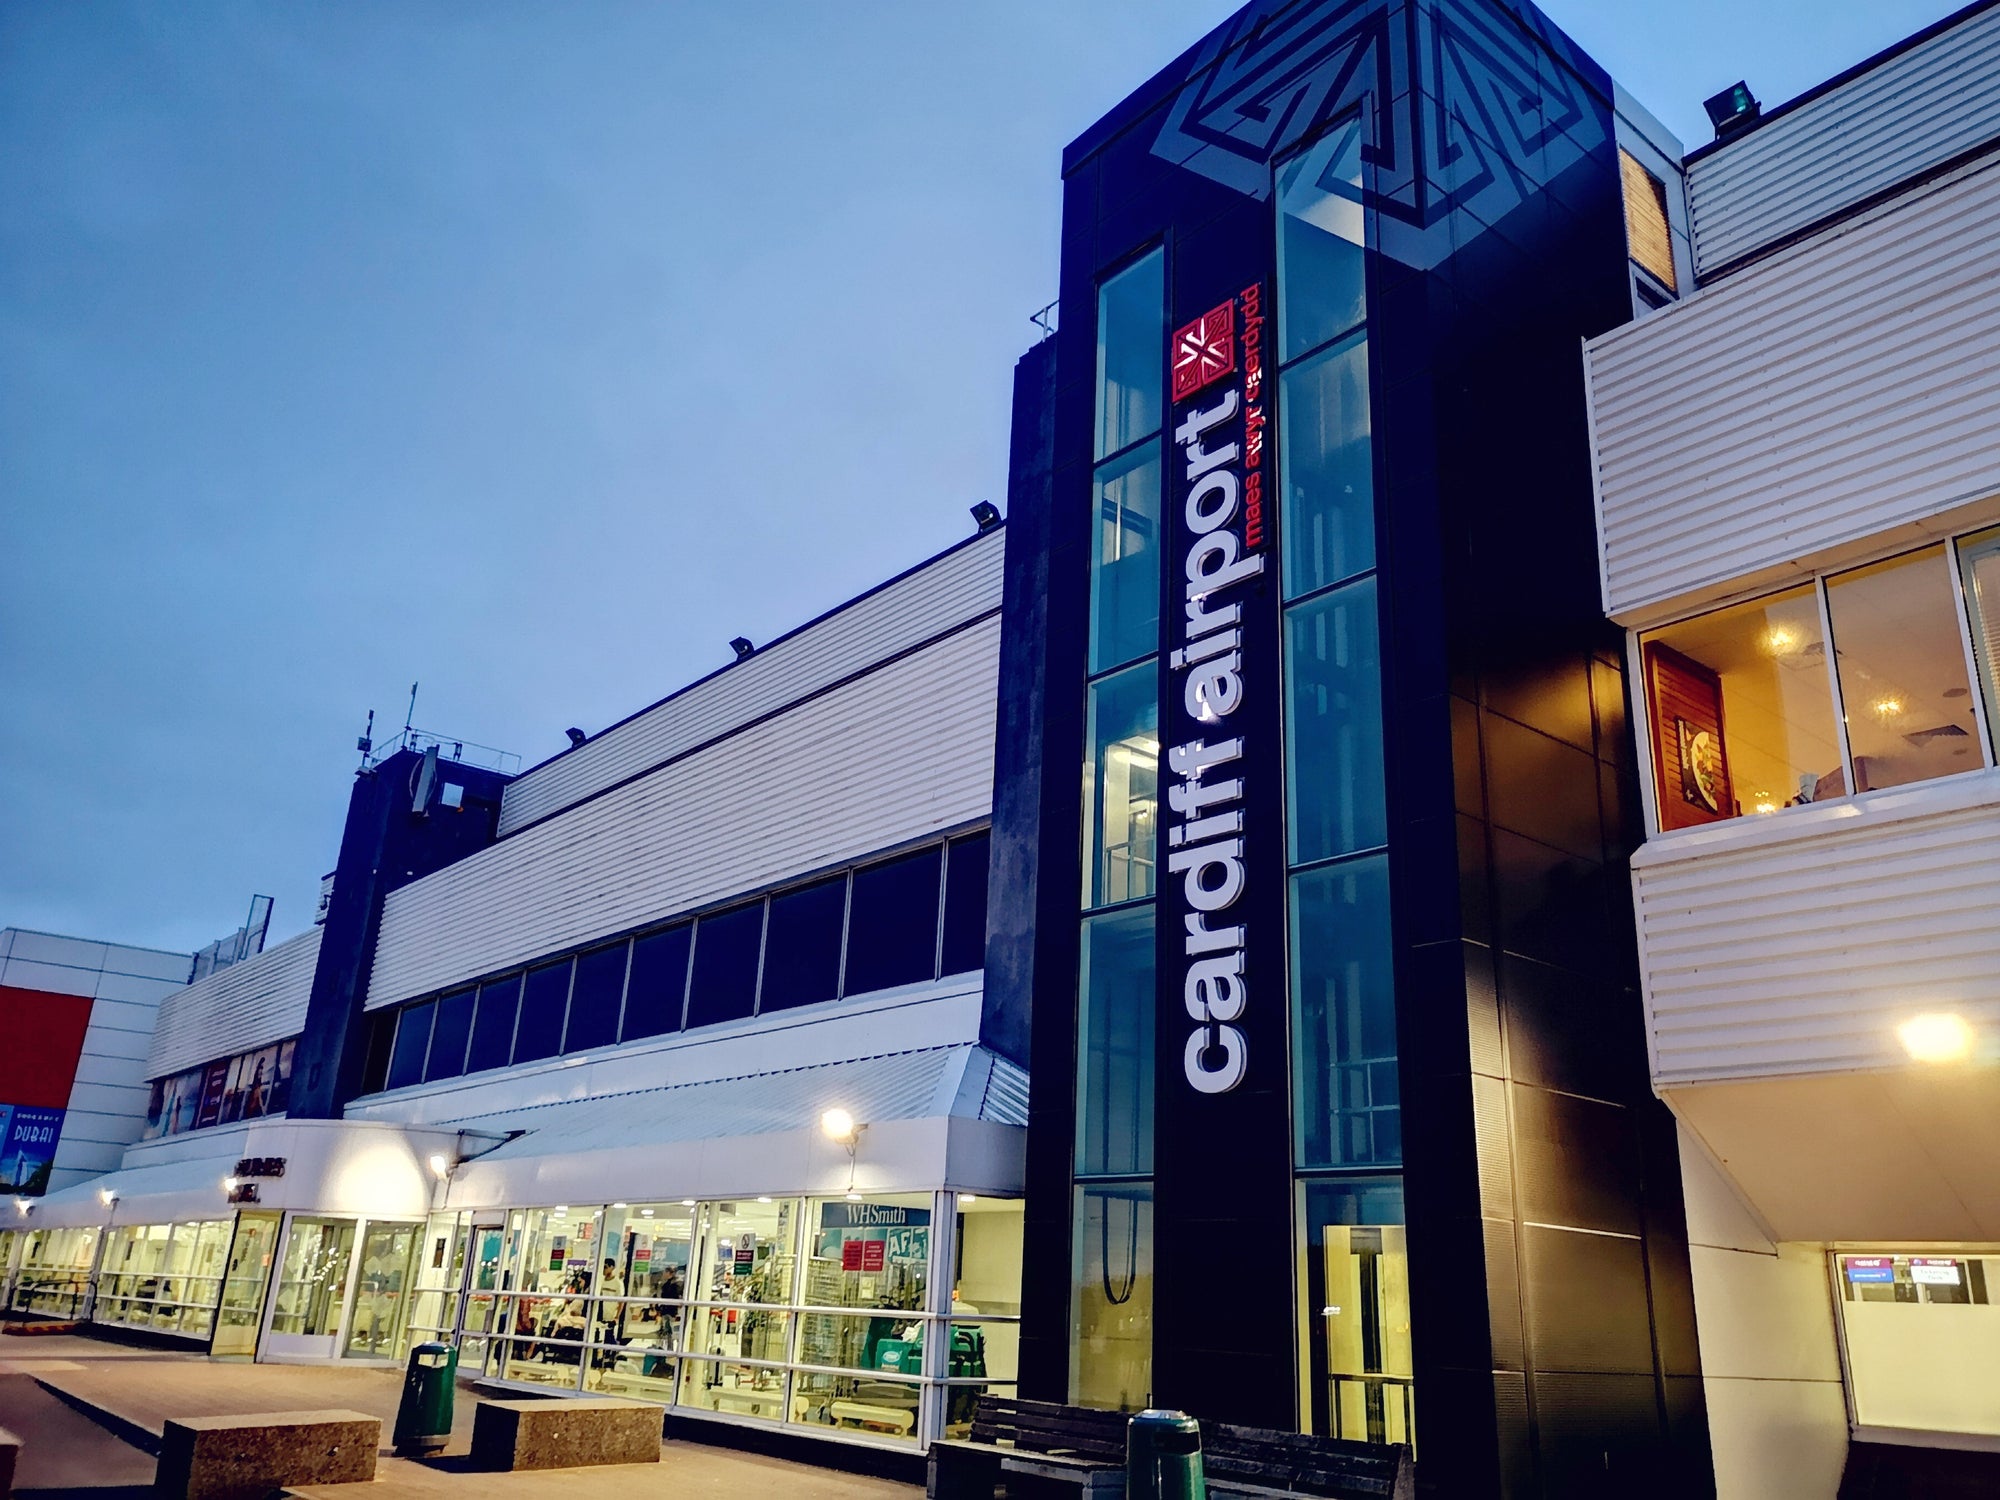 Cardiff Airport is the 20th busiest in the UK